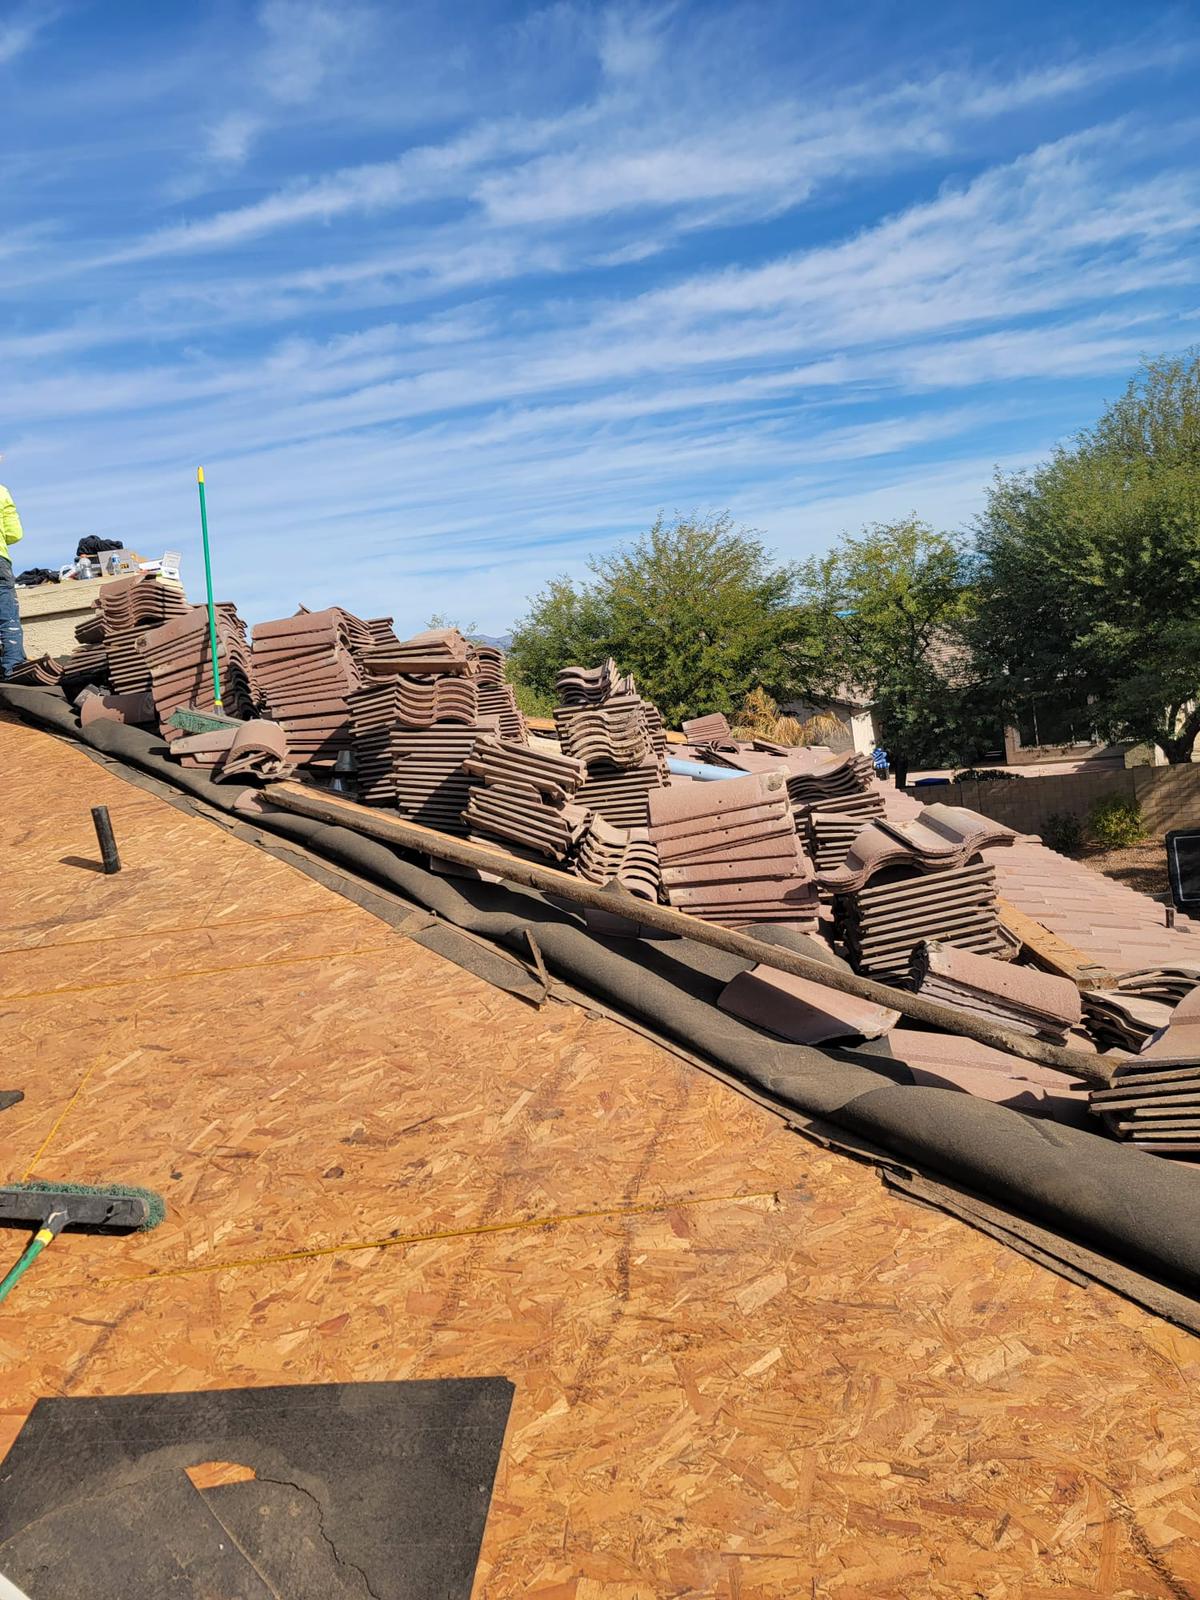 Rows of roof tiles ready for re-felting by Behmer Roofing, enhancing homes in Whisper Rock.